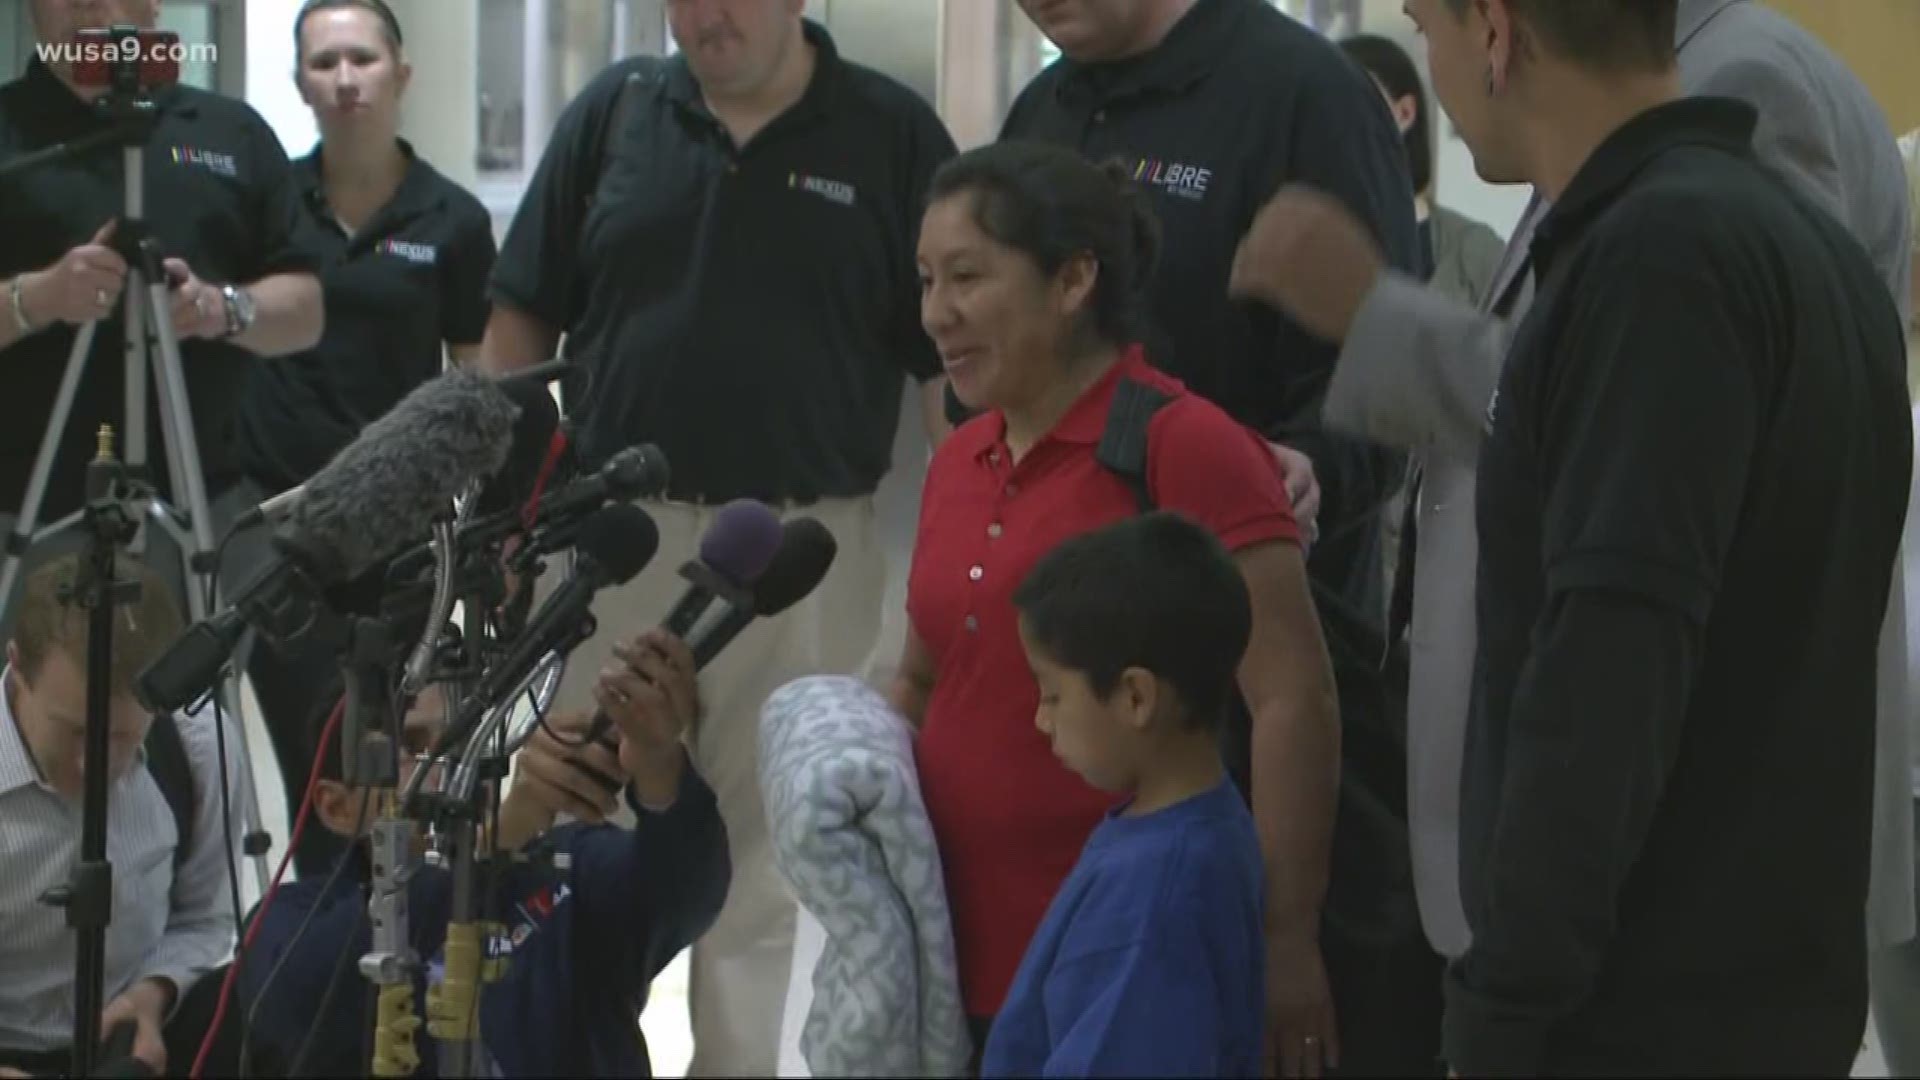 A mother and son are reunited after being separated at the border.